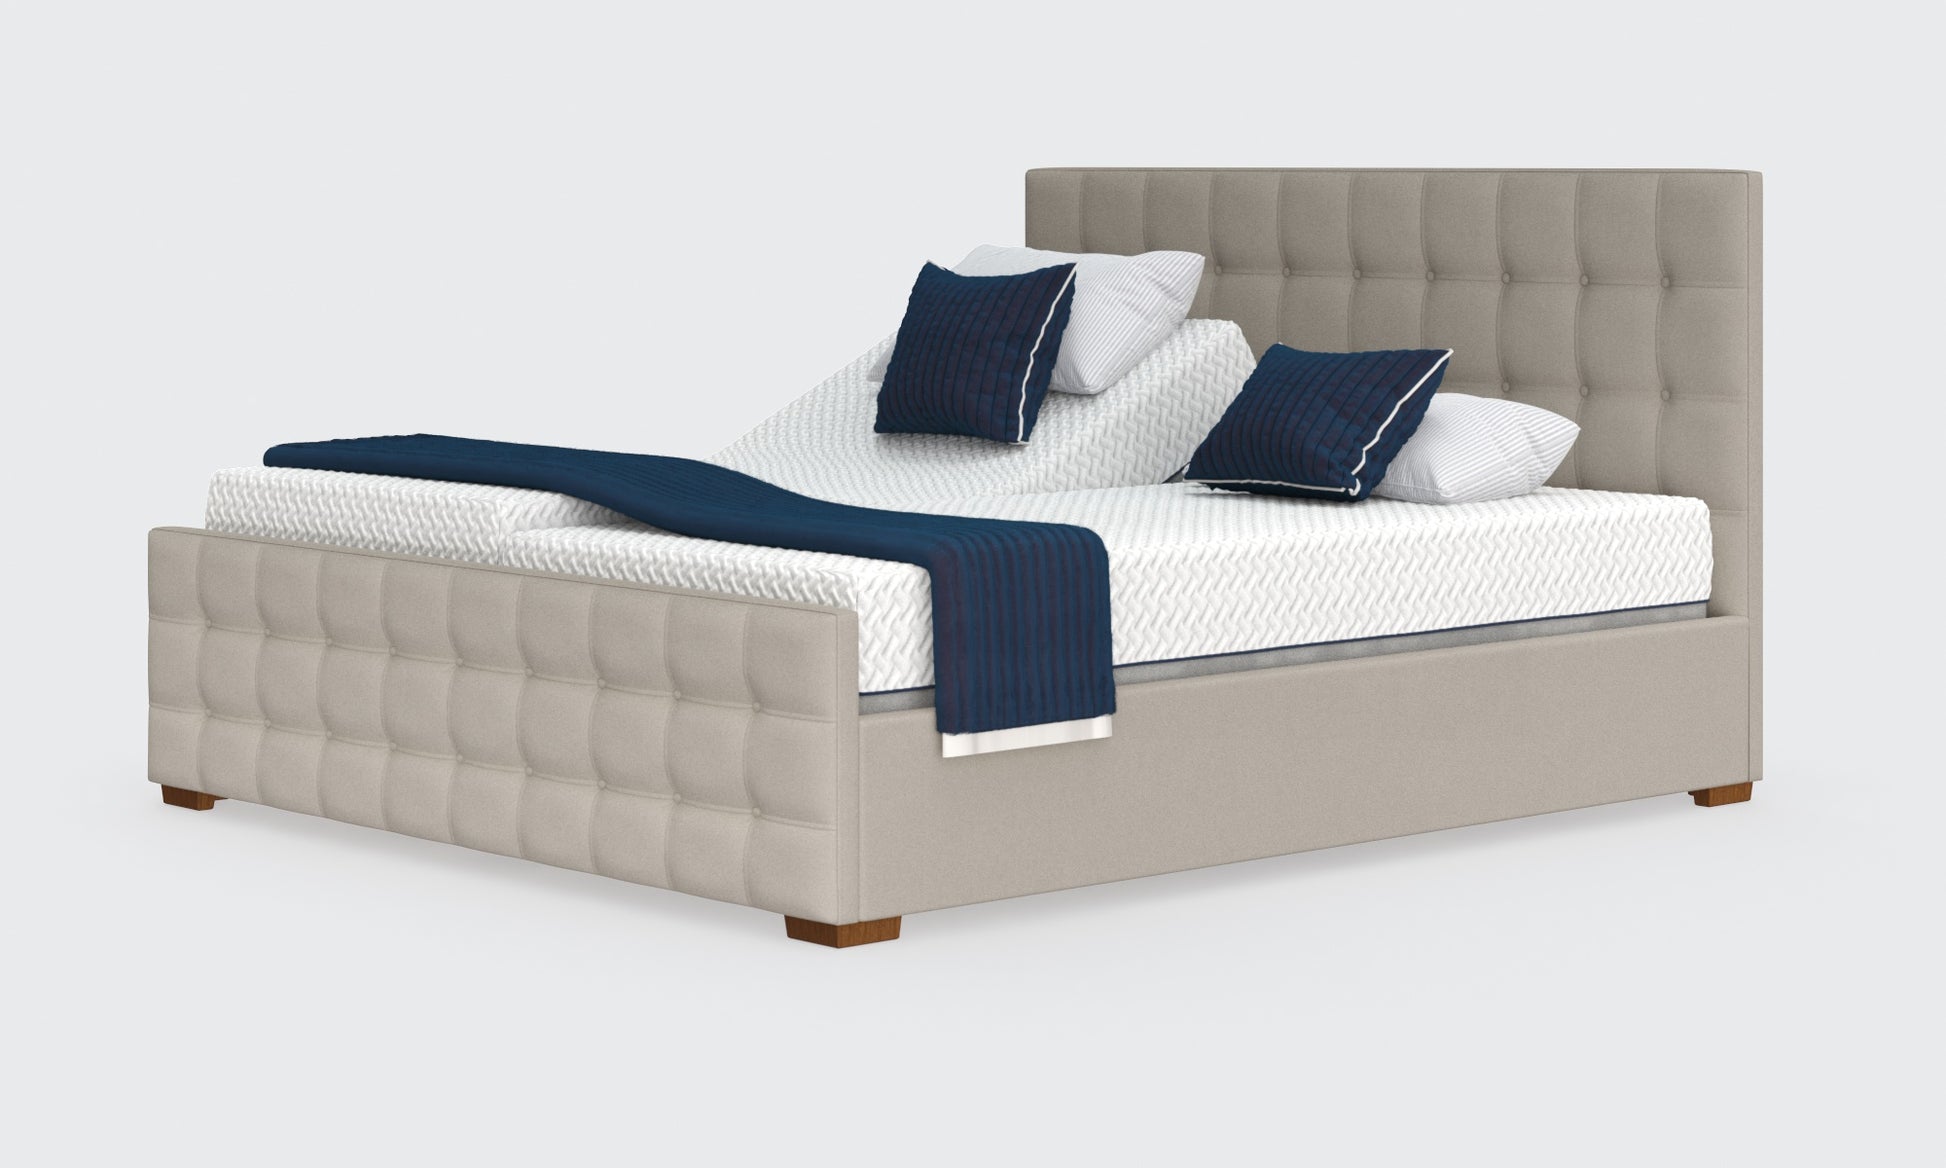 Edel 6ft bed and mattress in the linen material with the emerald headboard